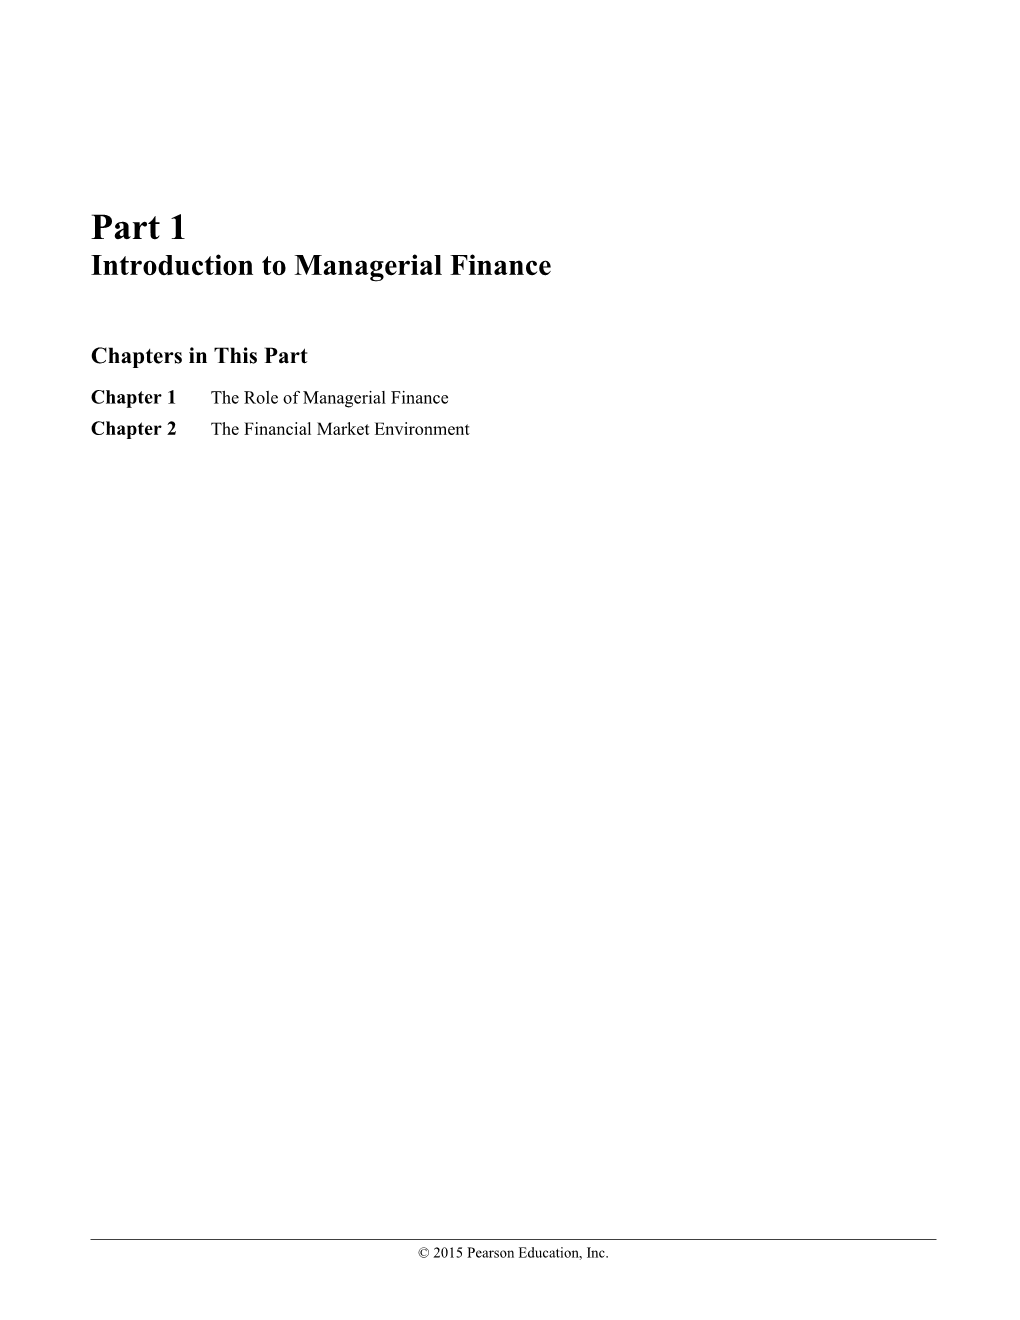 From 1: the Role of Managerial Finance 11